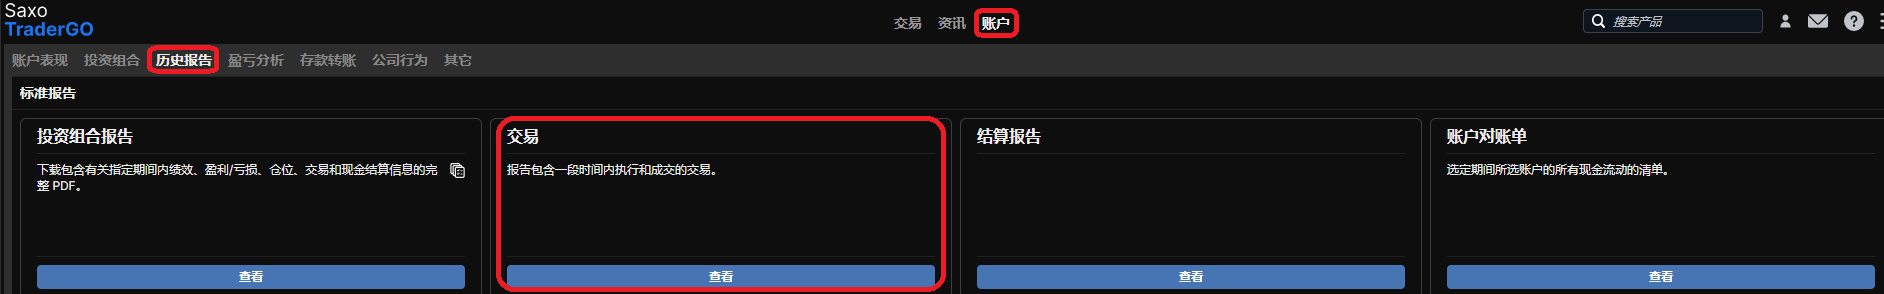 Account_to_Historic_reports_to_Trades_in_Chinese.PNG